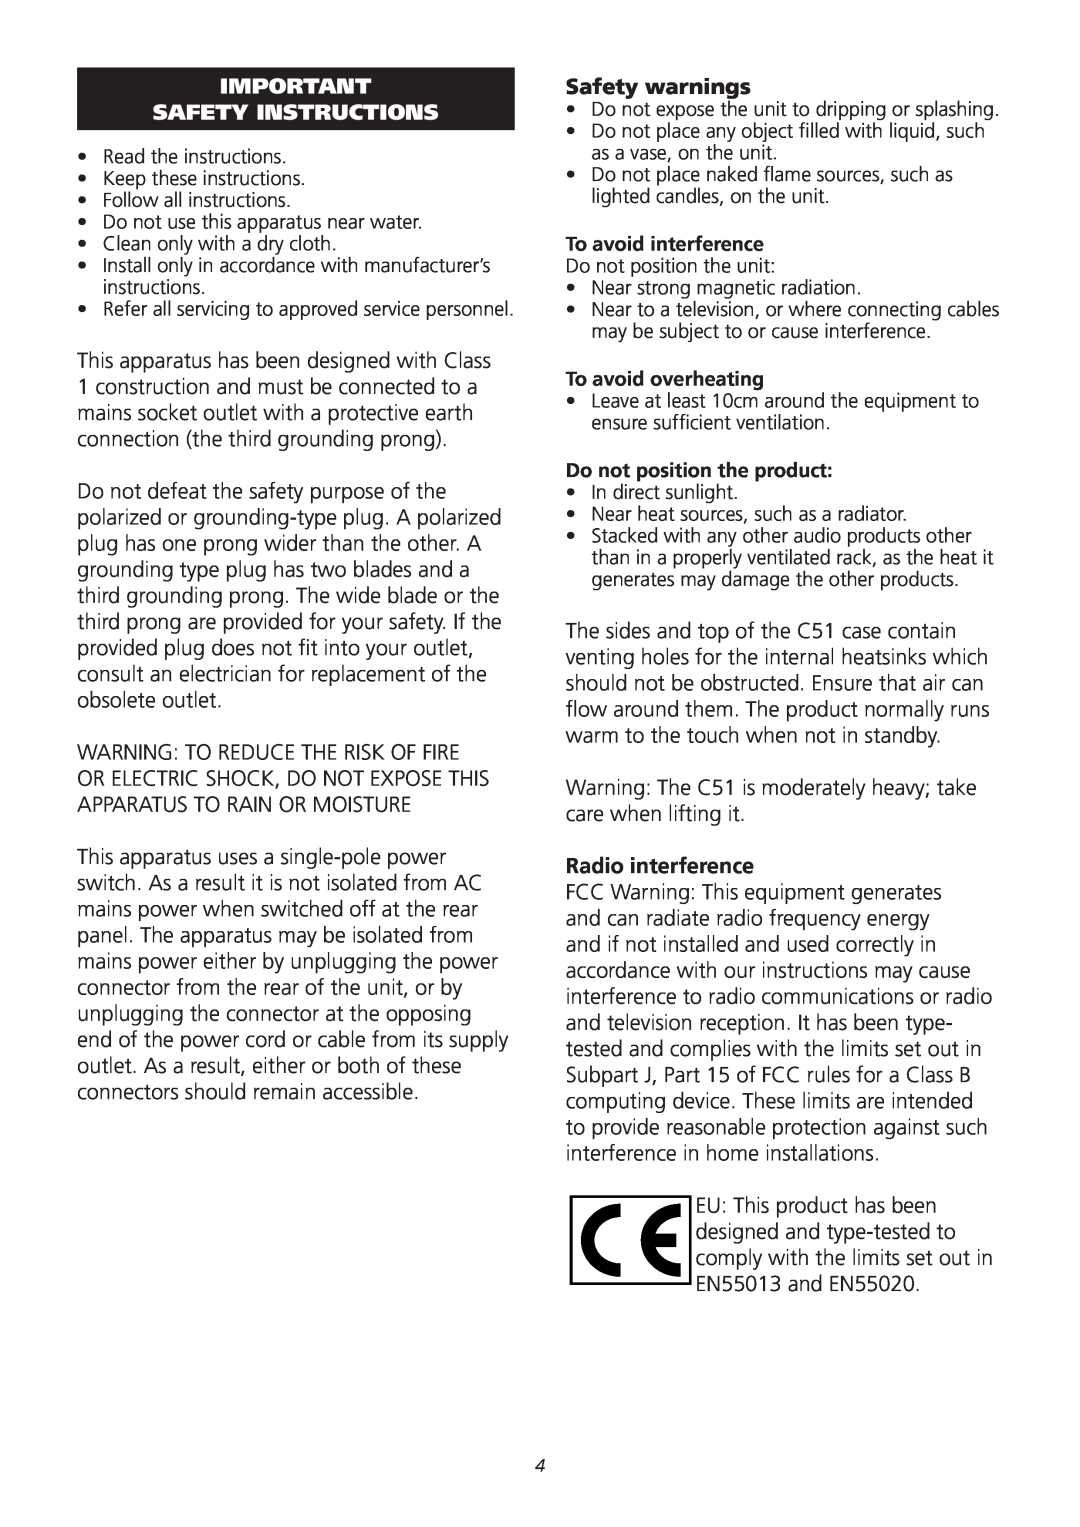 Meridian Audio C51 operation manual Safety Instructions, Safety warnings, Radio interference 